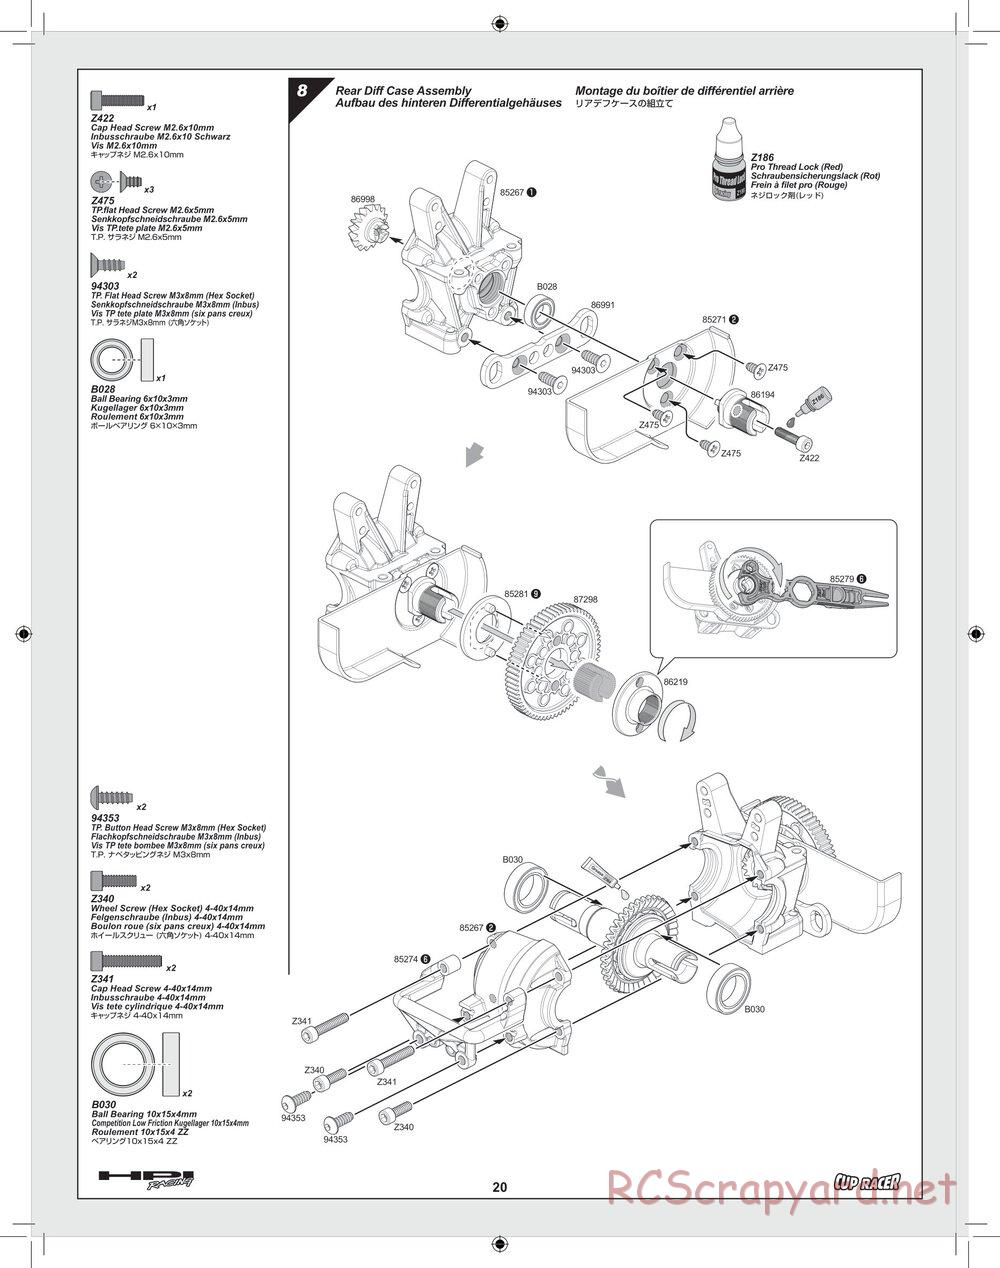 HPI - Cup Racer - Manual - Page 20